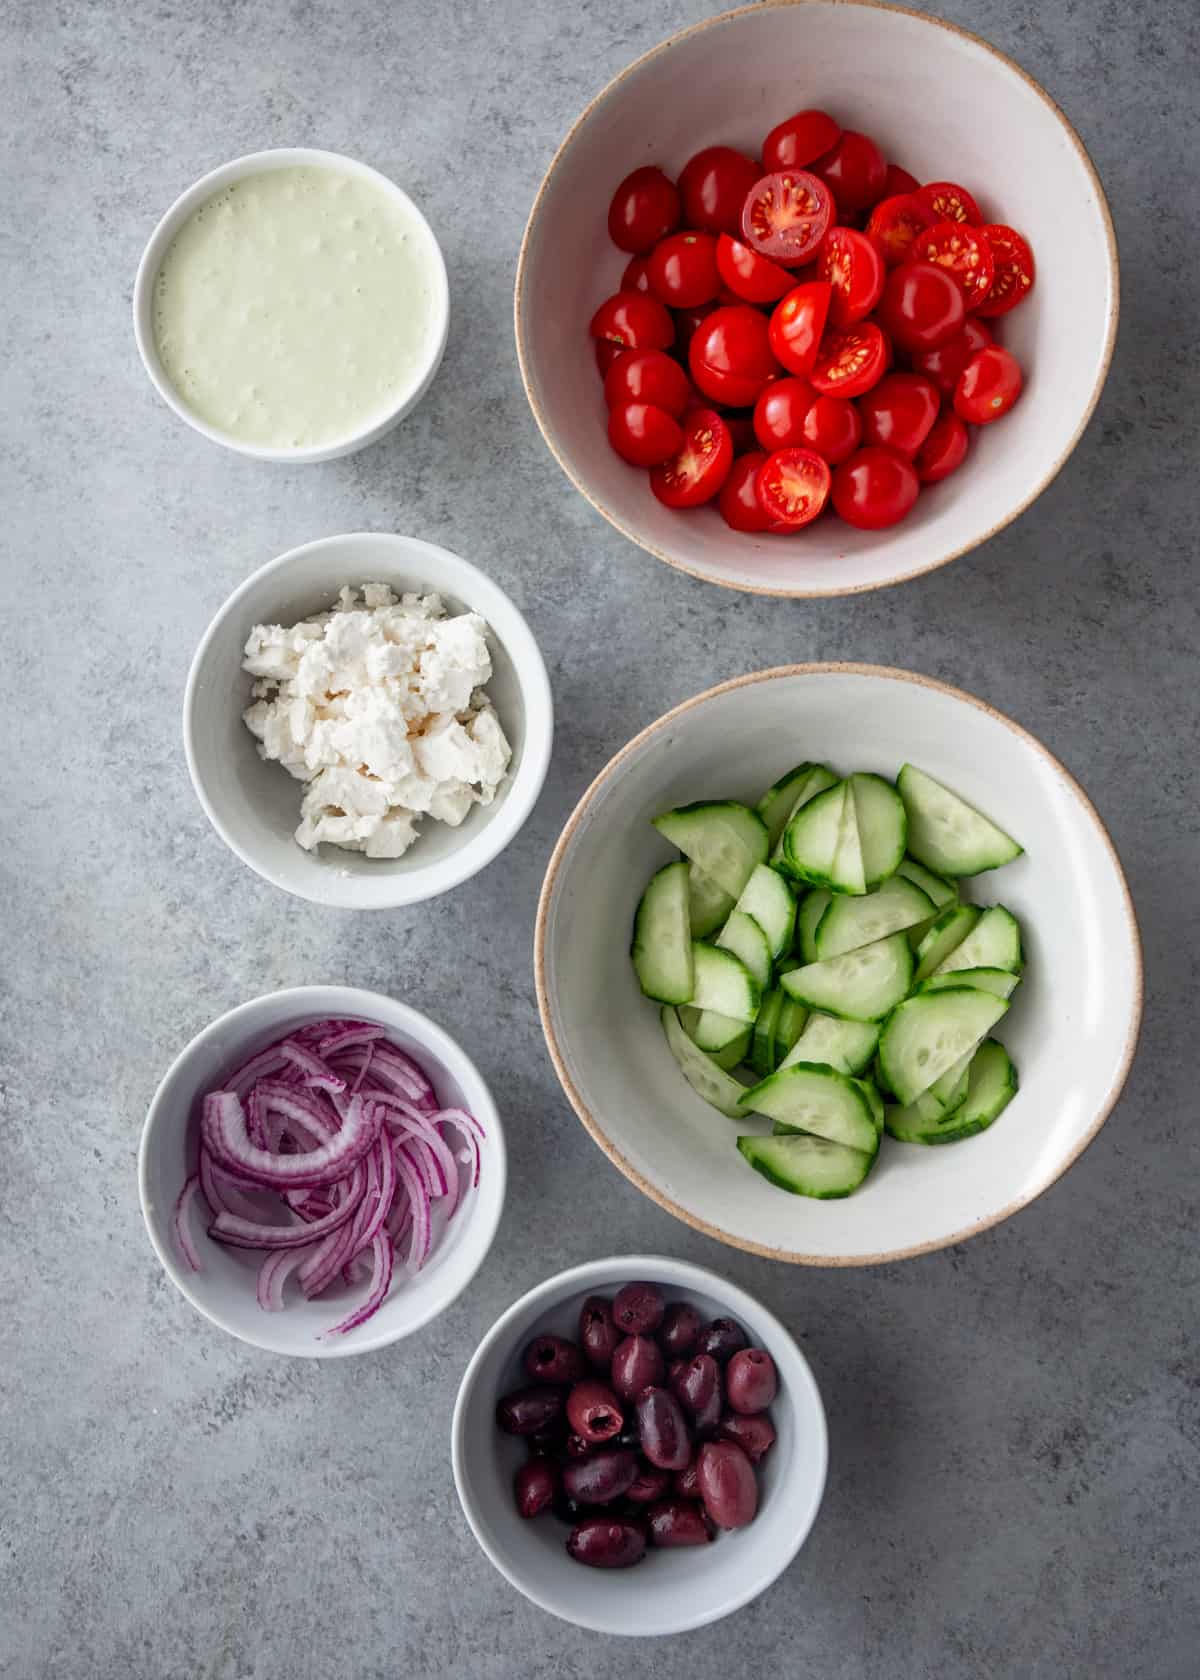 ingredients for salad in white bowls on a grey countertop